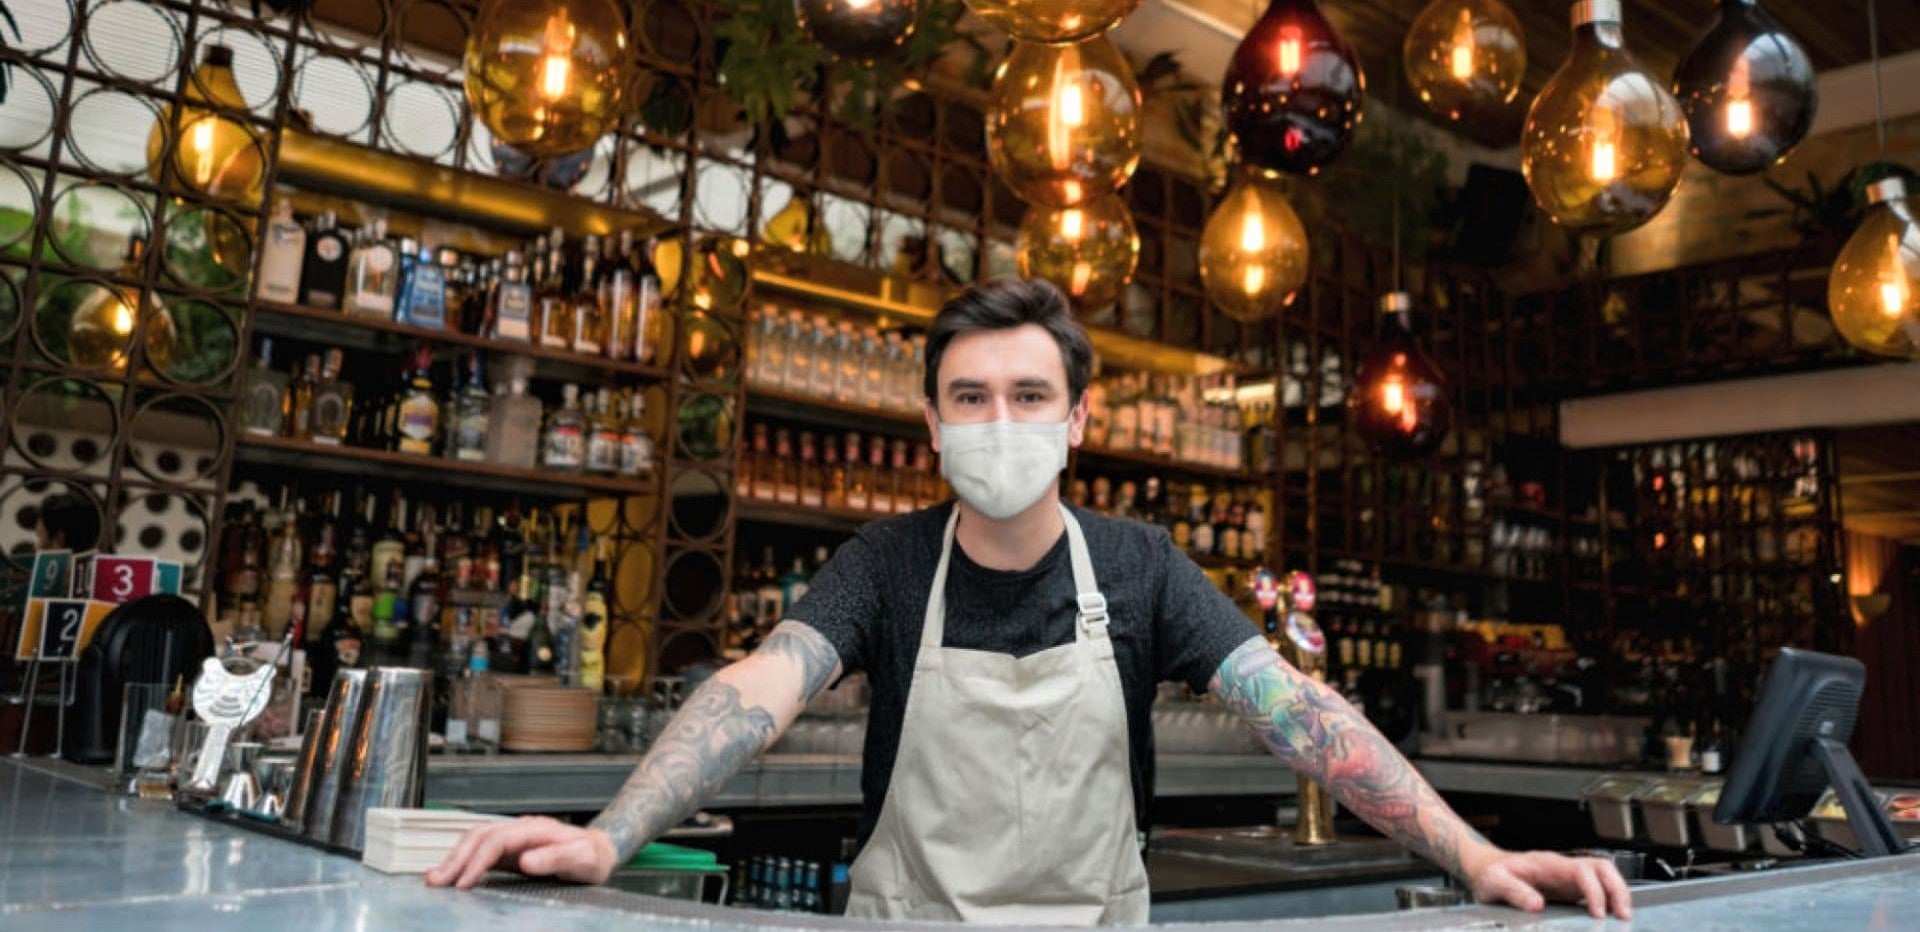 barman in face mask stands behind bar in newly reopened restaurant